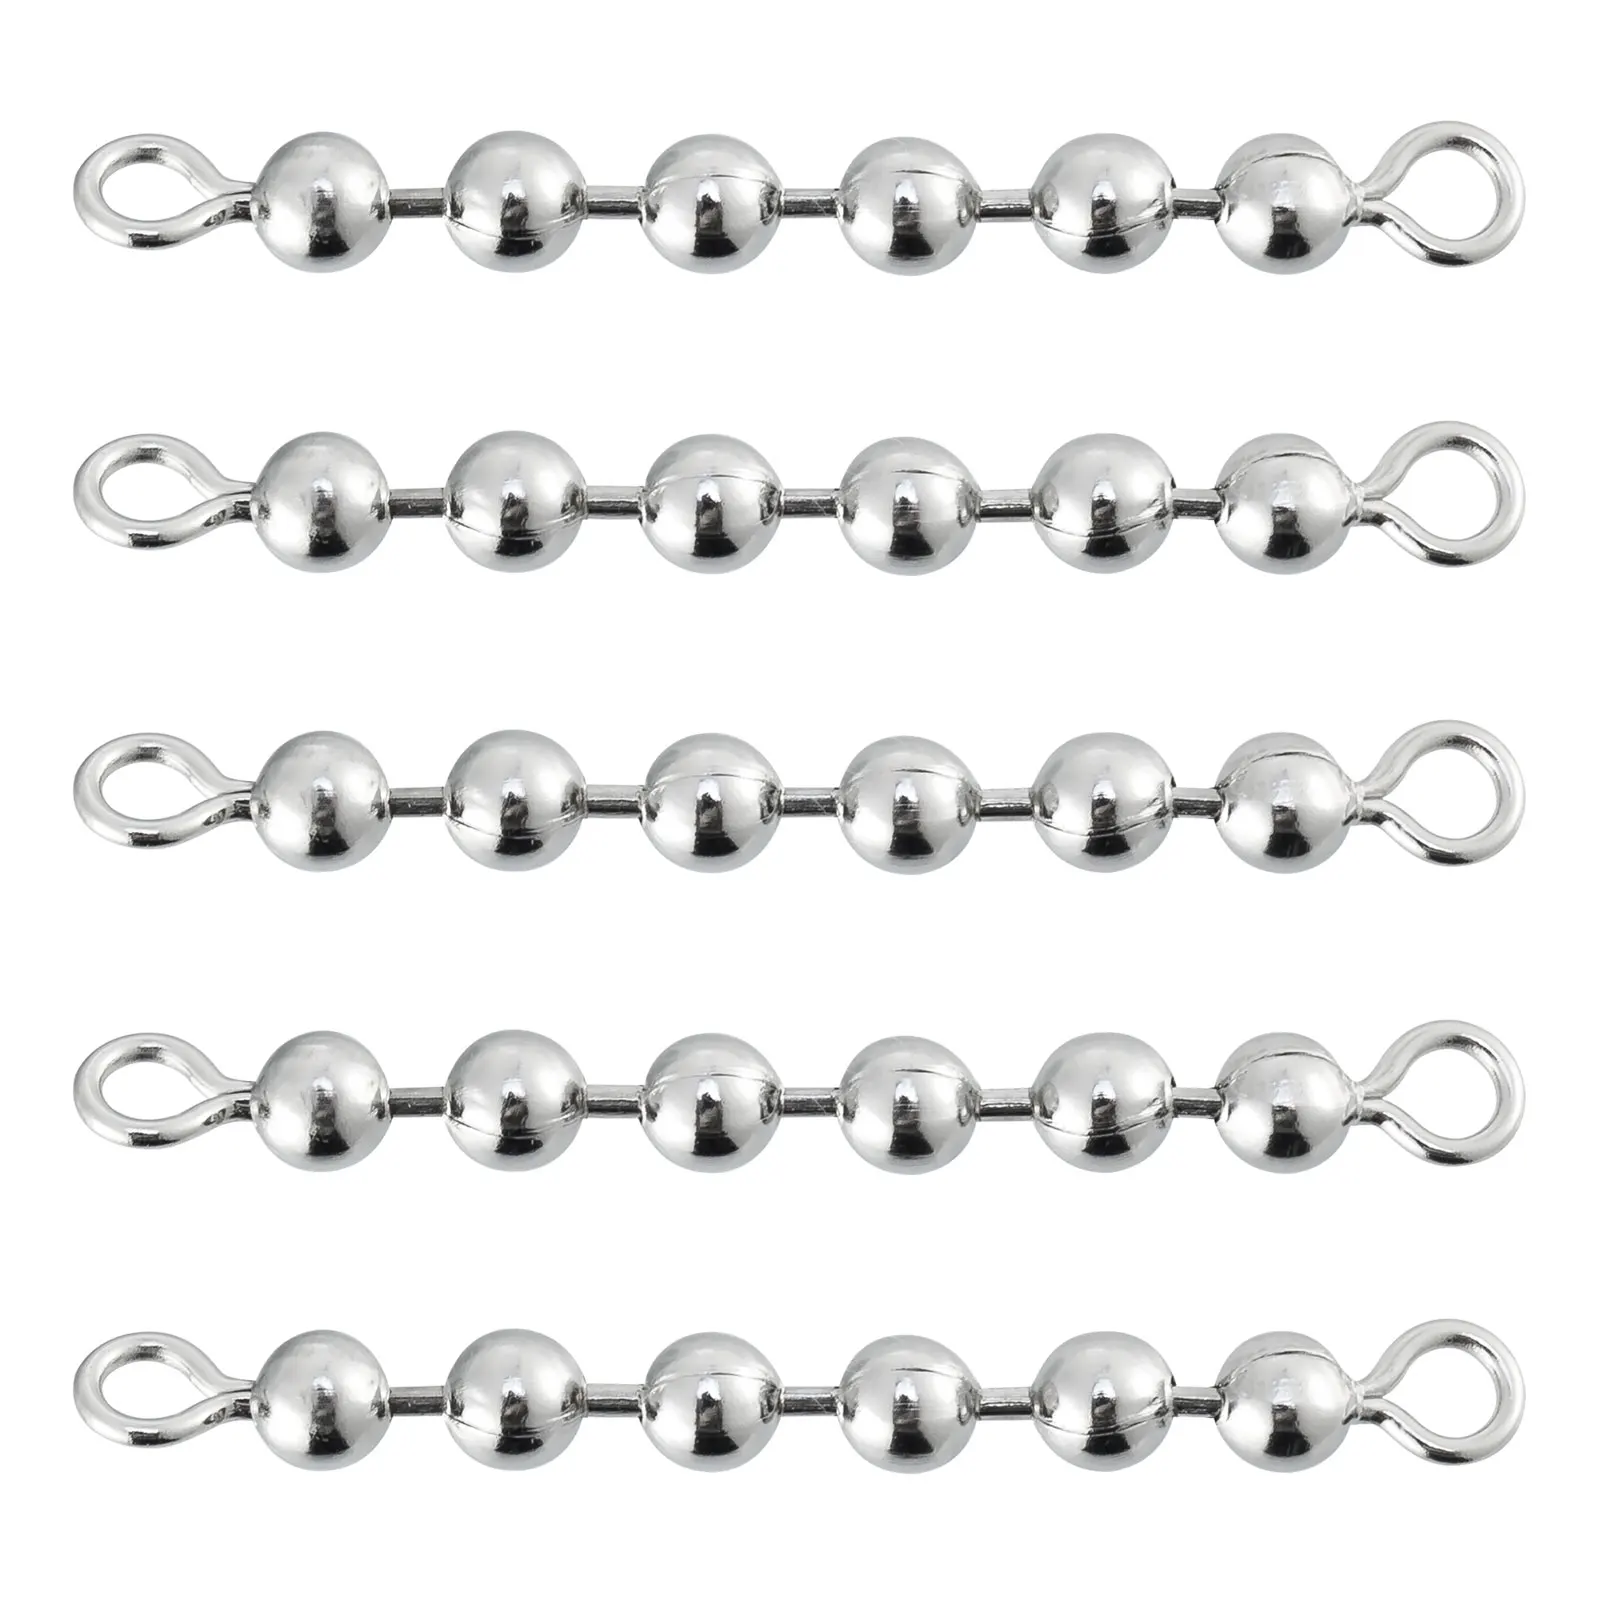 

50/100pcs Fishing Swivel Ball Bearing Solid Ring Rolling Bead Chain Connector for Trolling Rig Saltwater Stainless Steel Trout